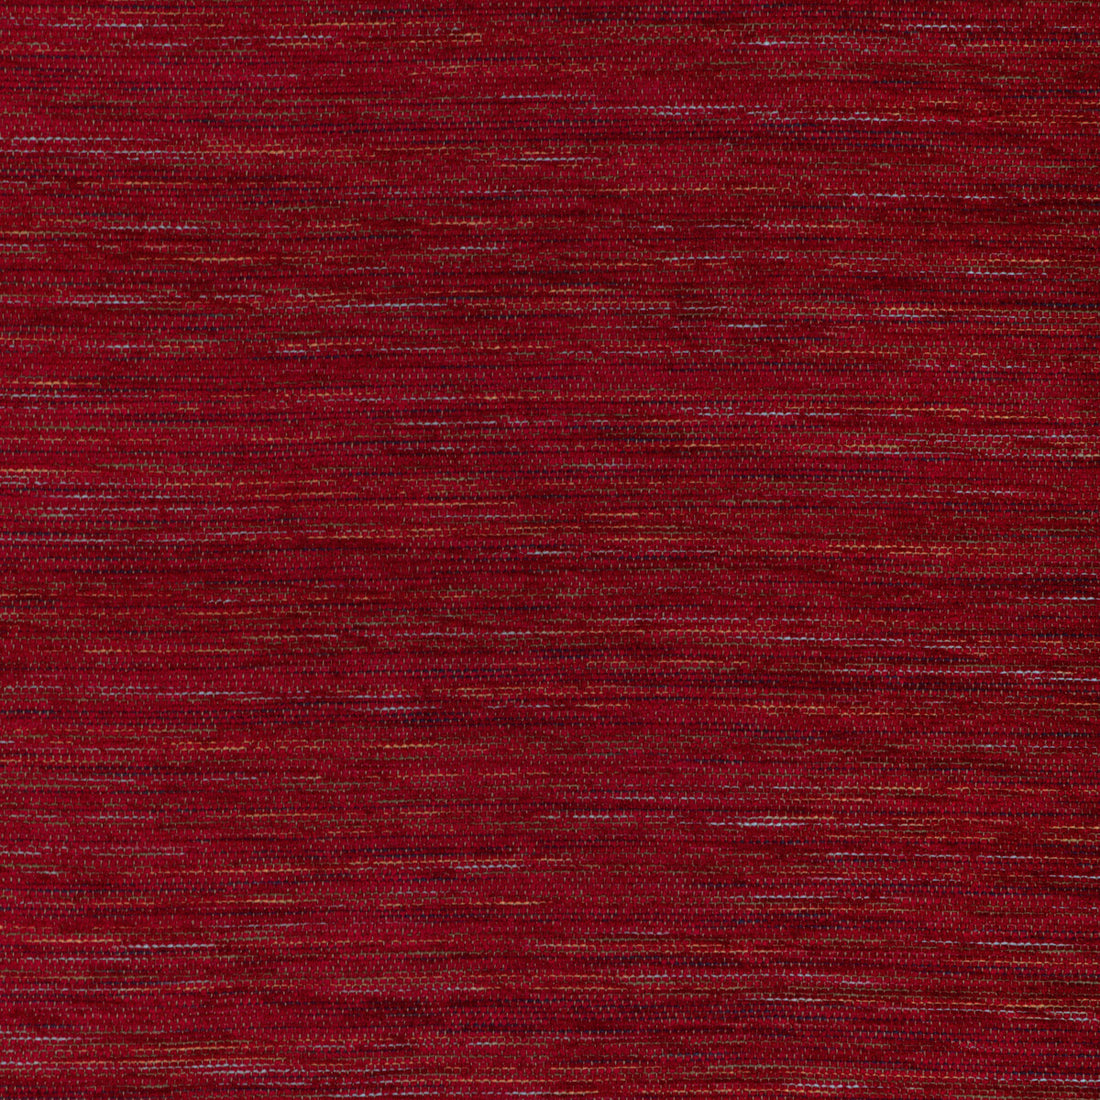 Foray Texture fabric in red color - pattern 8023156.19.0 - by Brunschwig &amp; Fils in the Chambery Textures IV collection